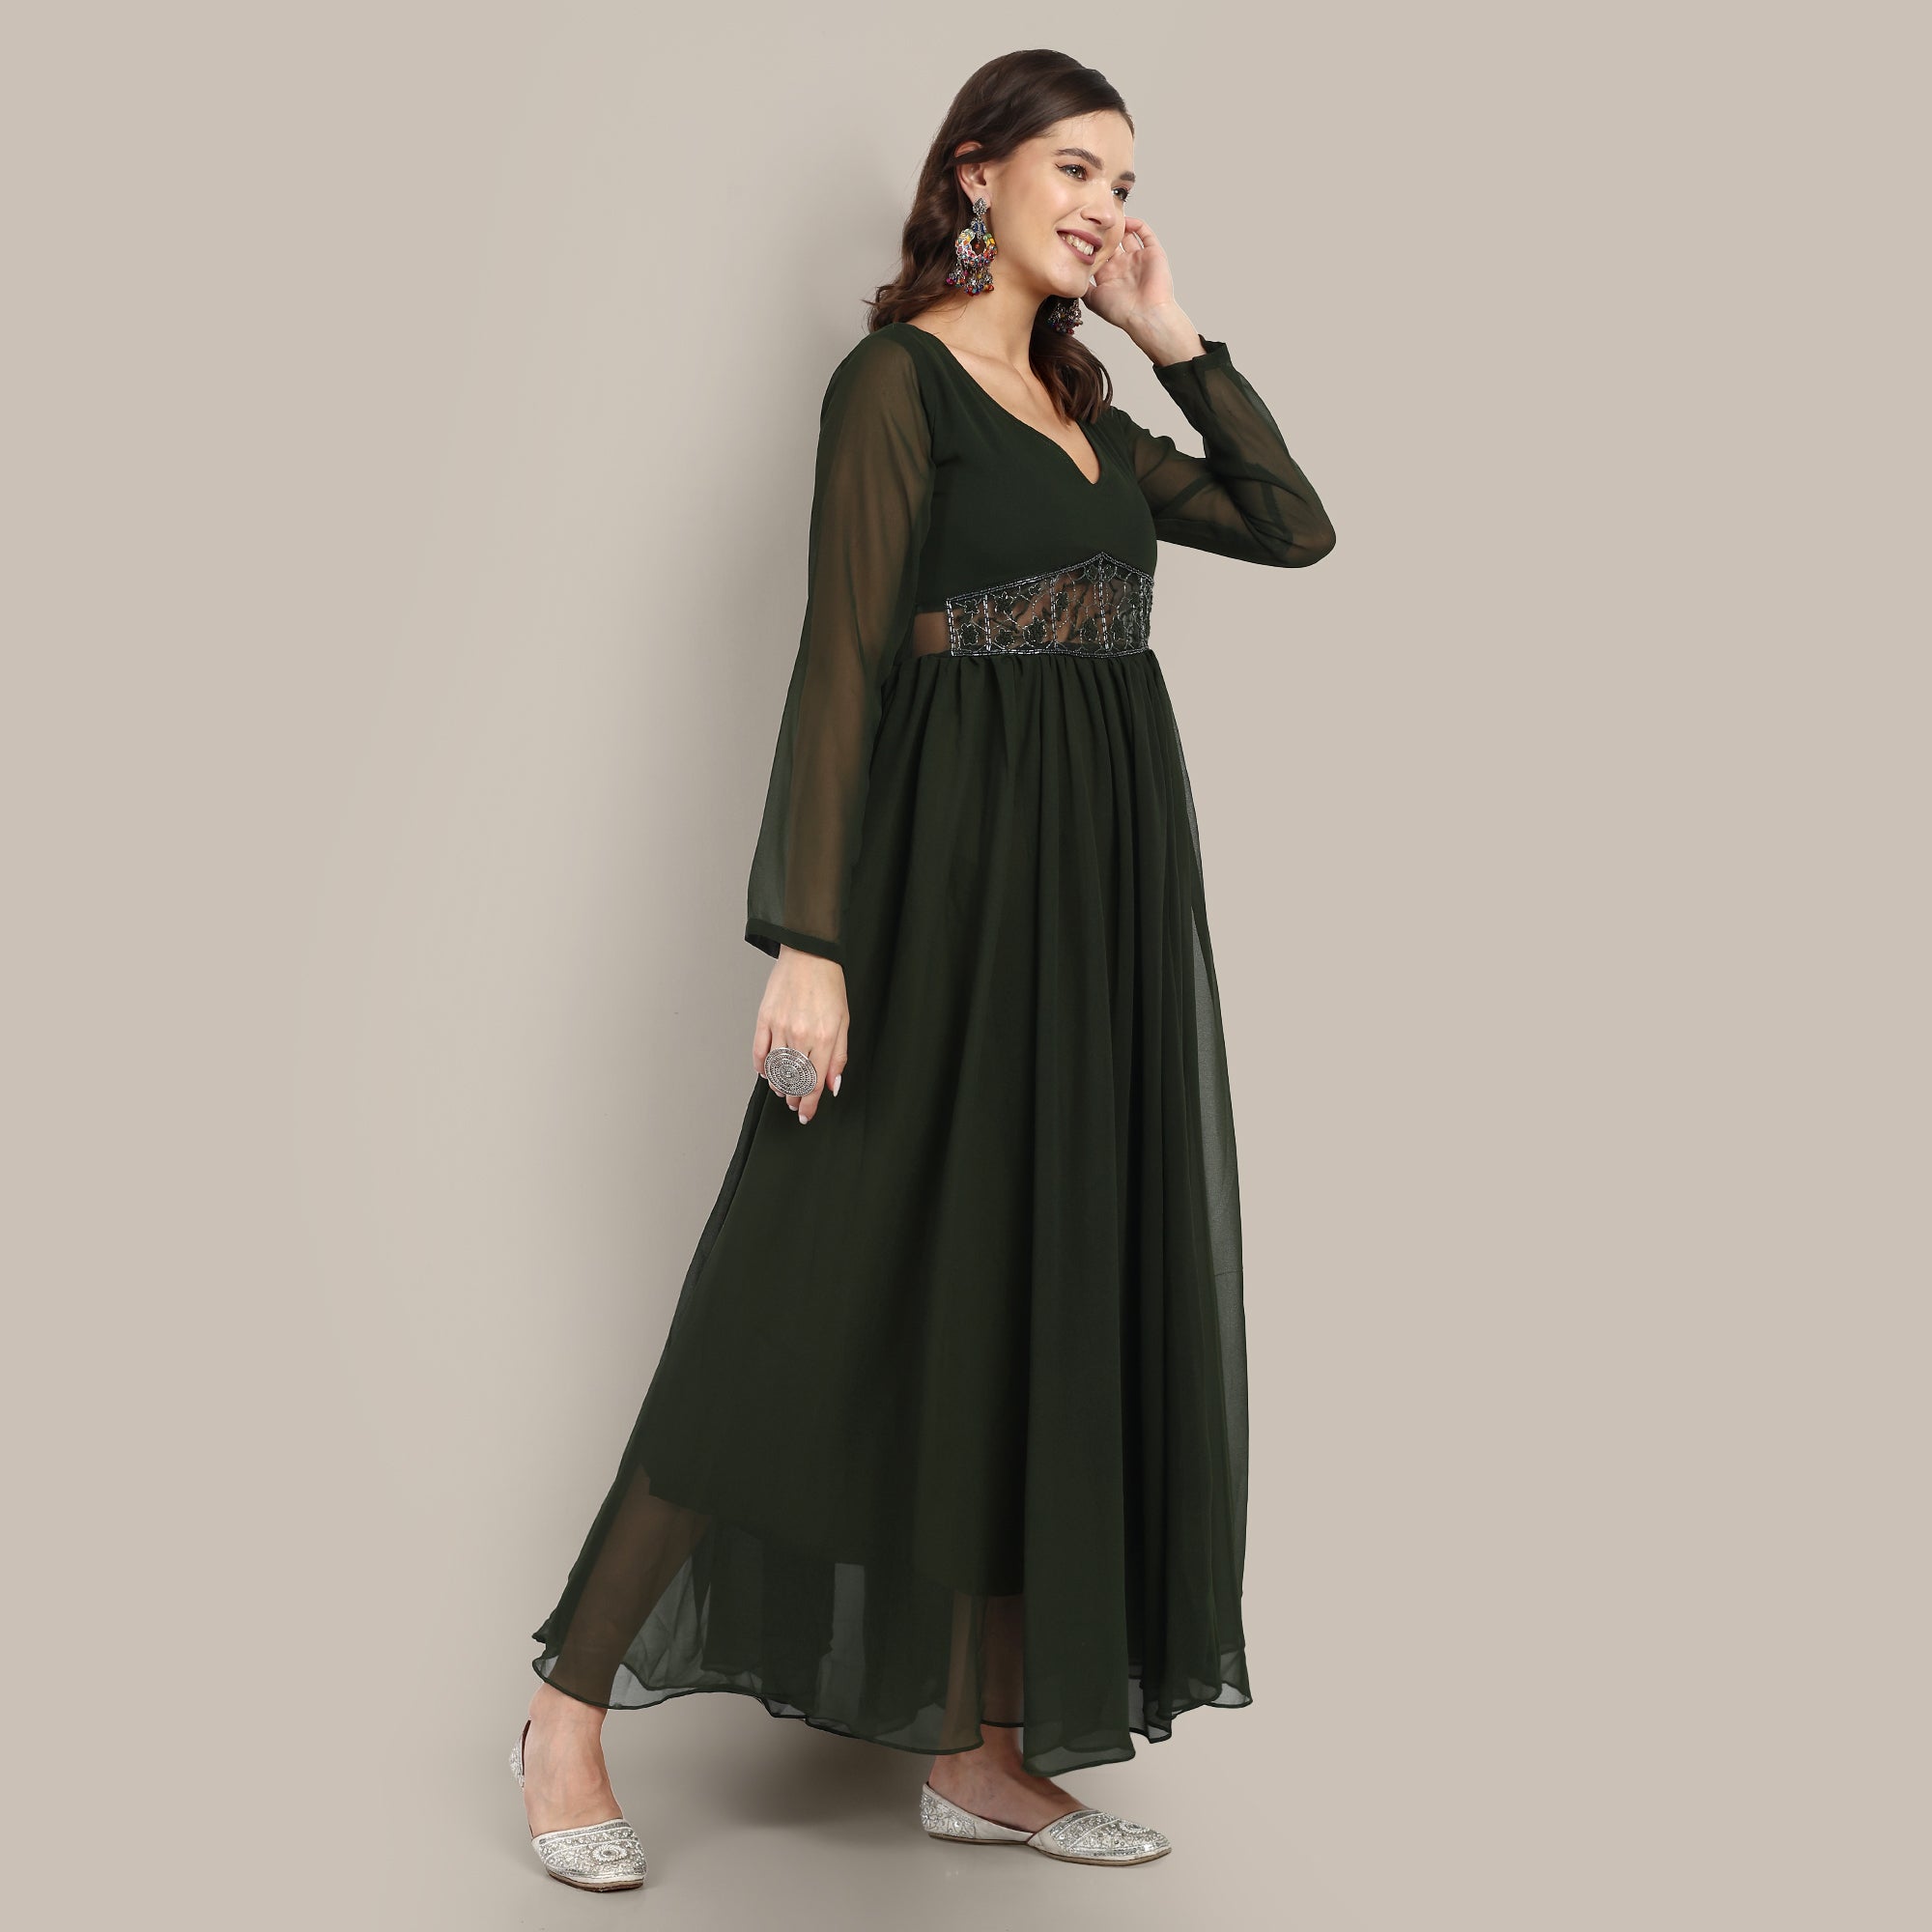 Green Anarkali Gown With V-Neckline, Handwork Panel At The Waist And Full Sleeves